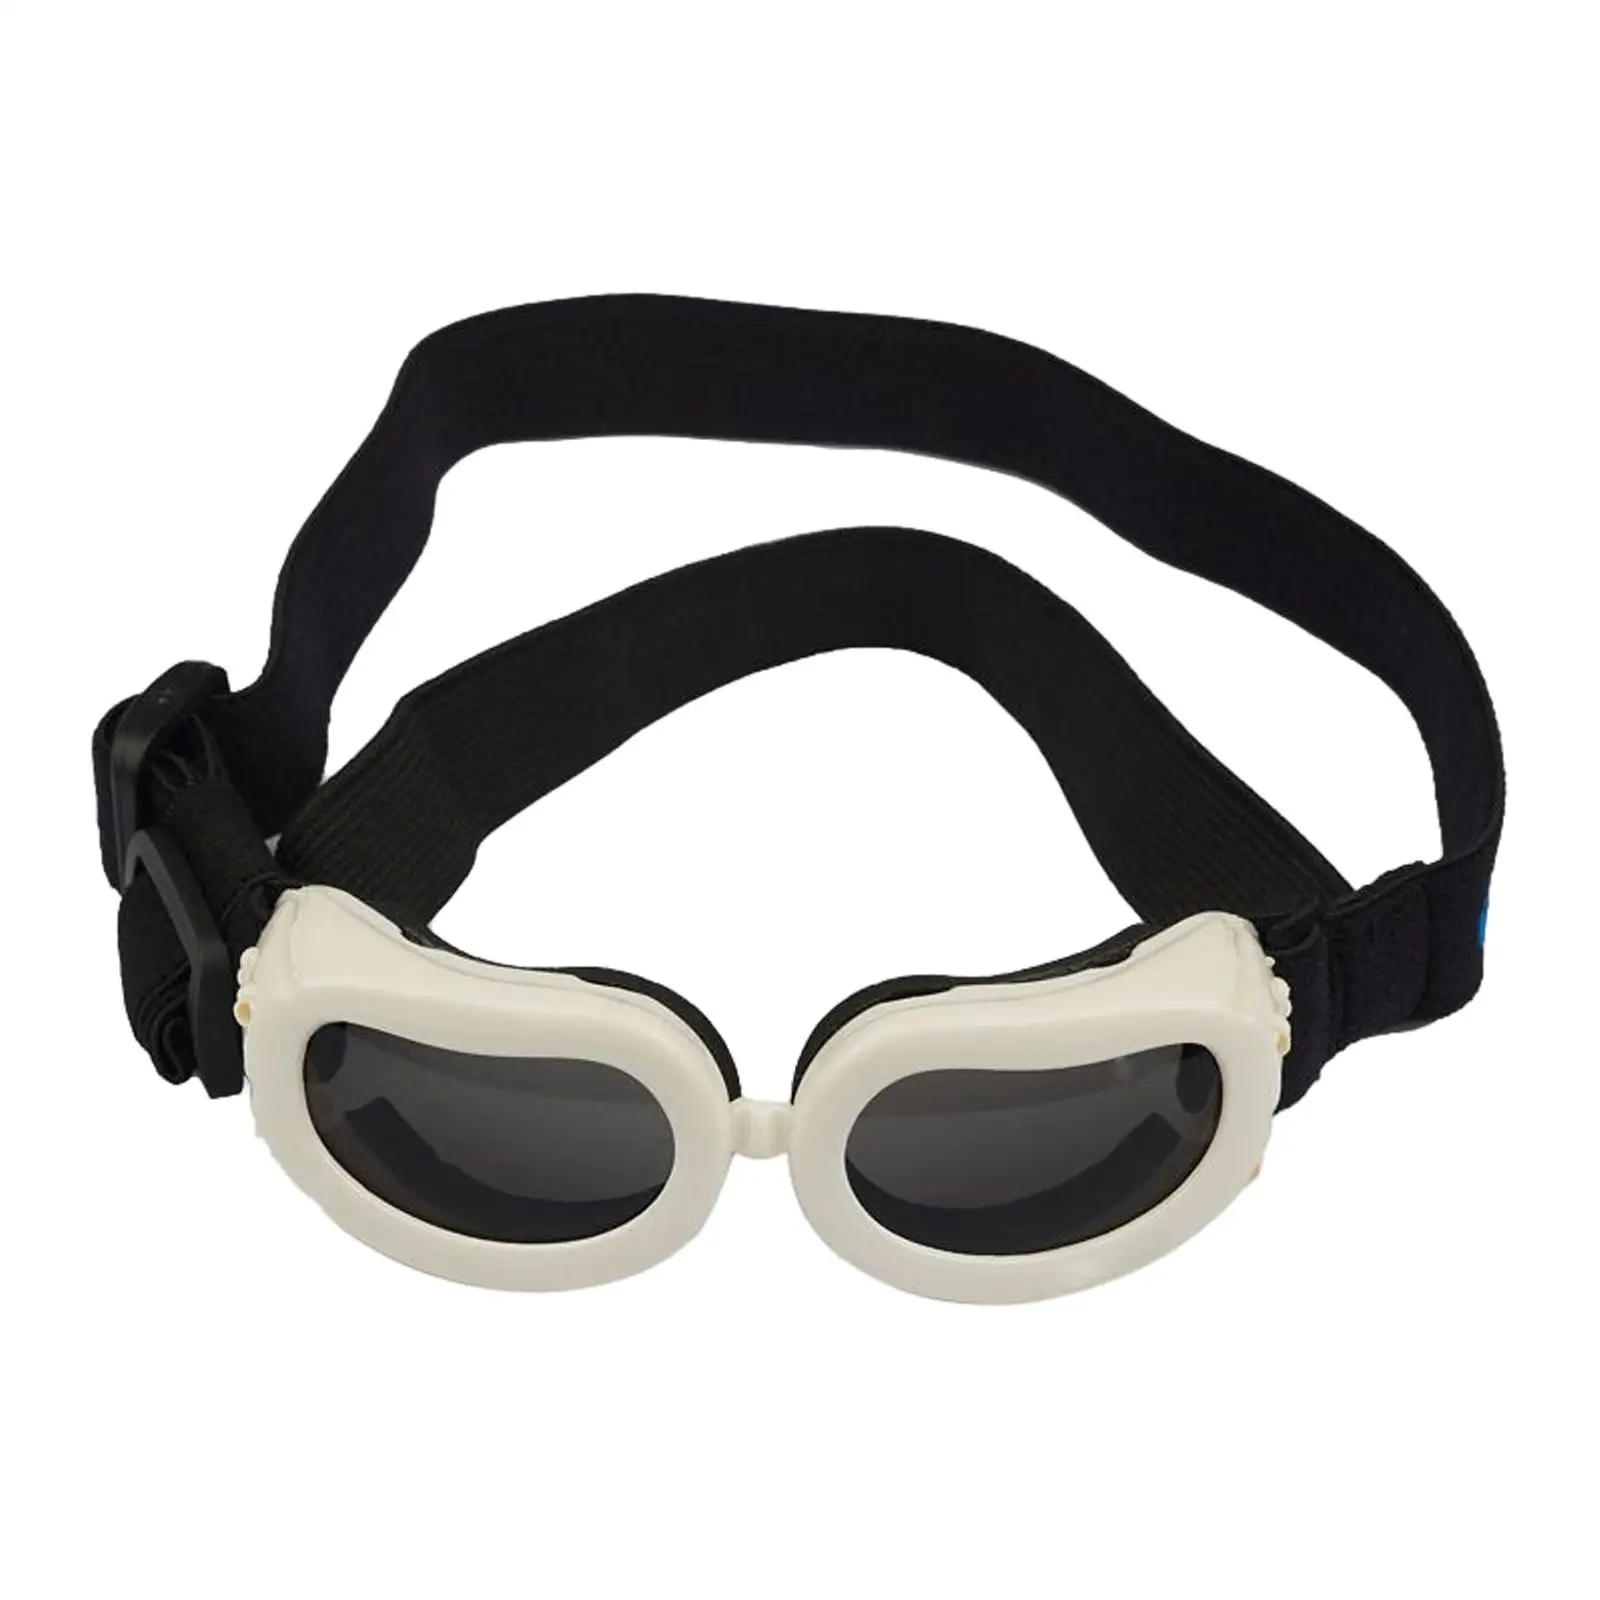 Dog Goggles with Adjustable Band Wind Protection for Puppy and Cat